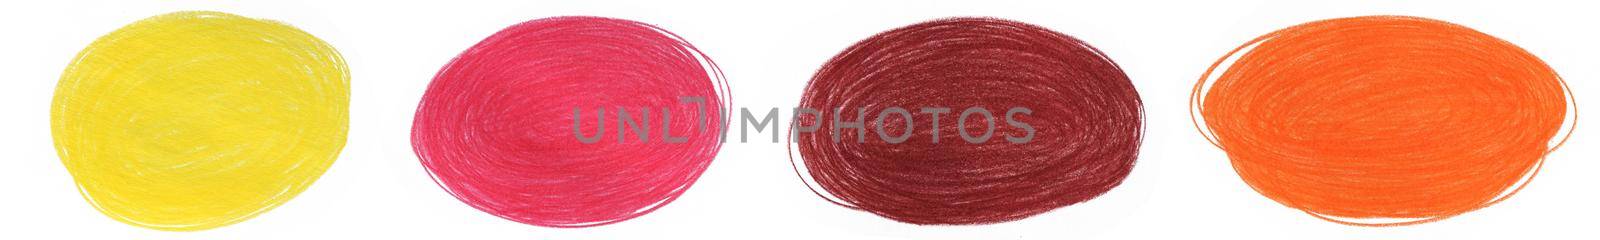 Set of Abstract Stain Drawn by Colored Pencil Isolated on White Background. by Rina_Dozornaya